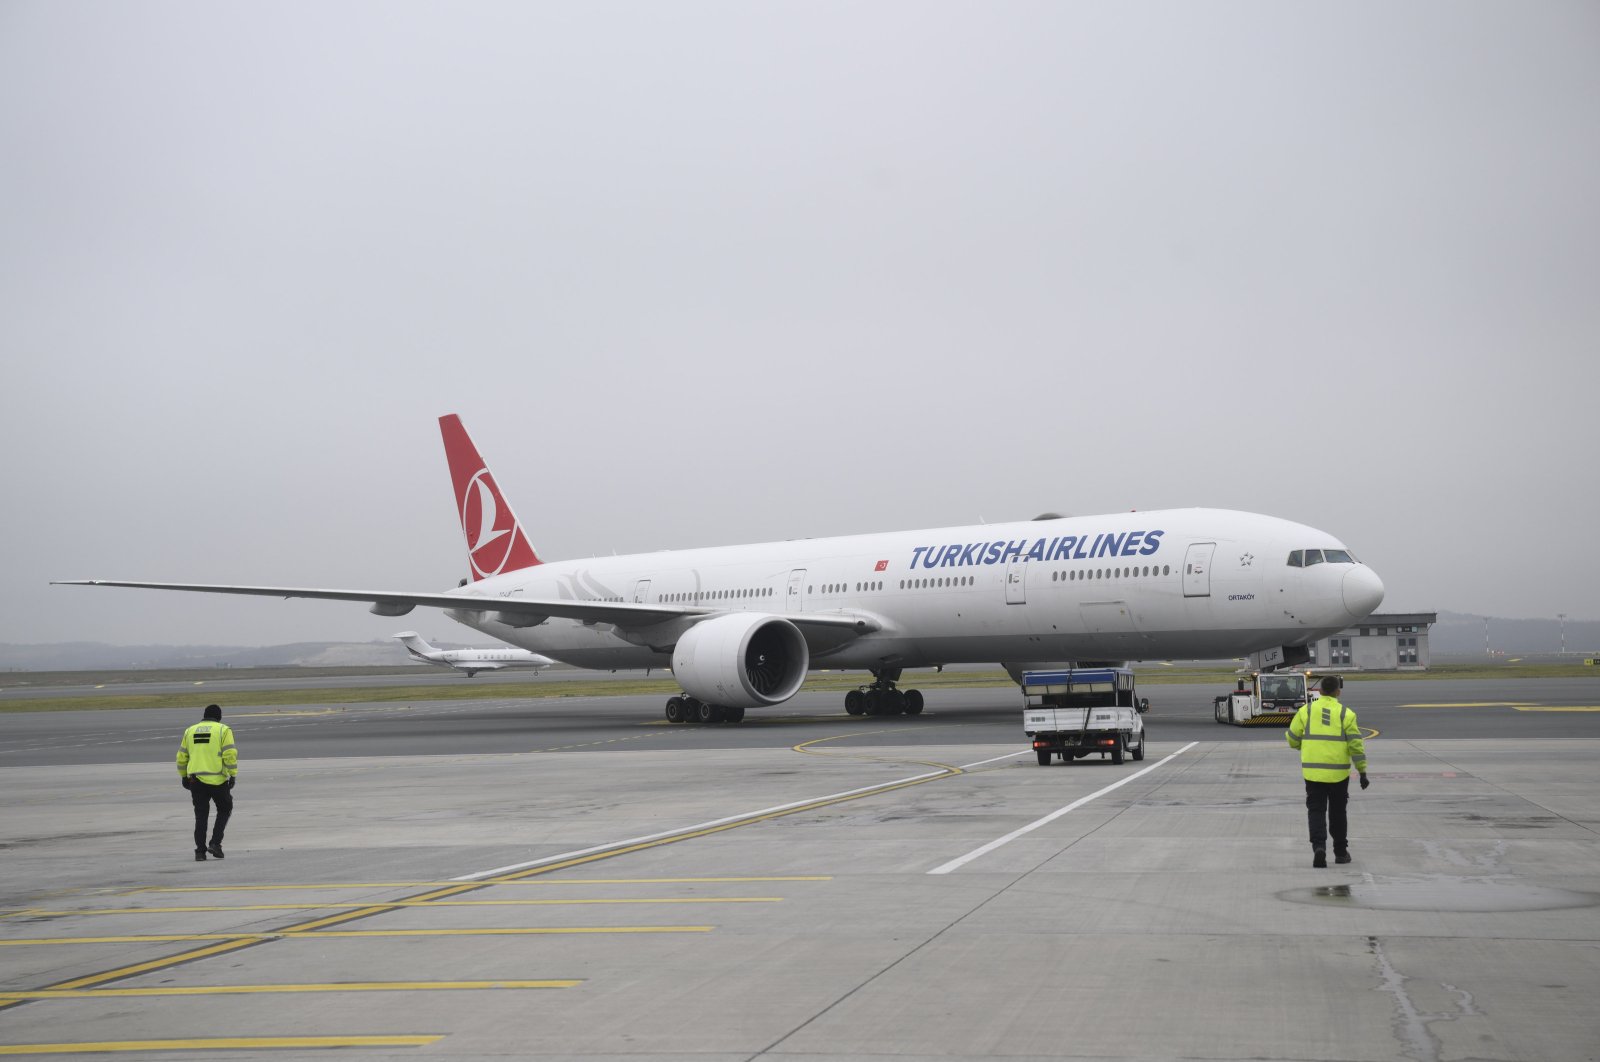 Turkish Airlines makes its historic debut flight to Australia